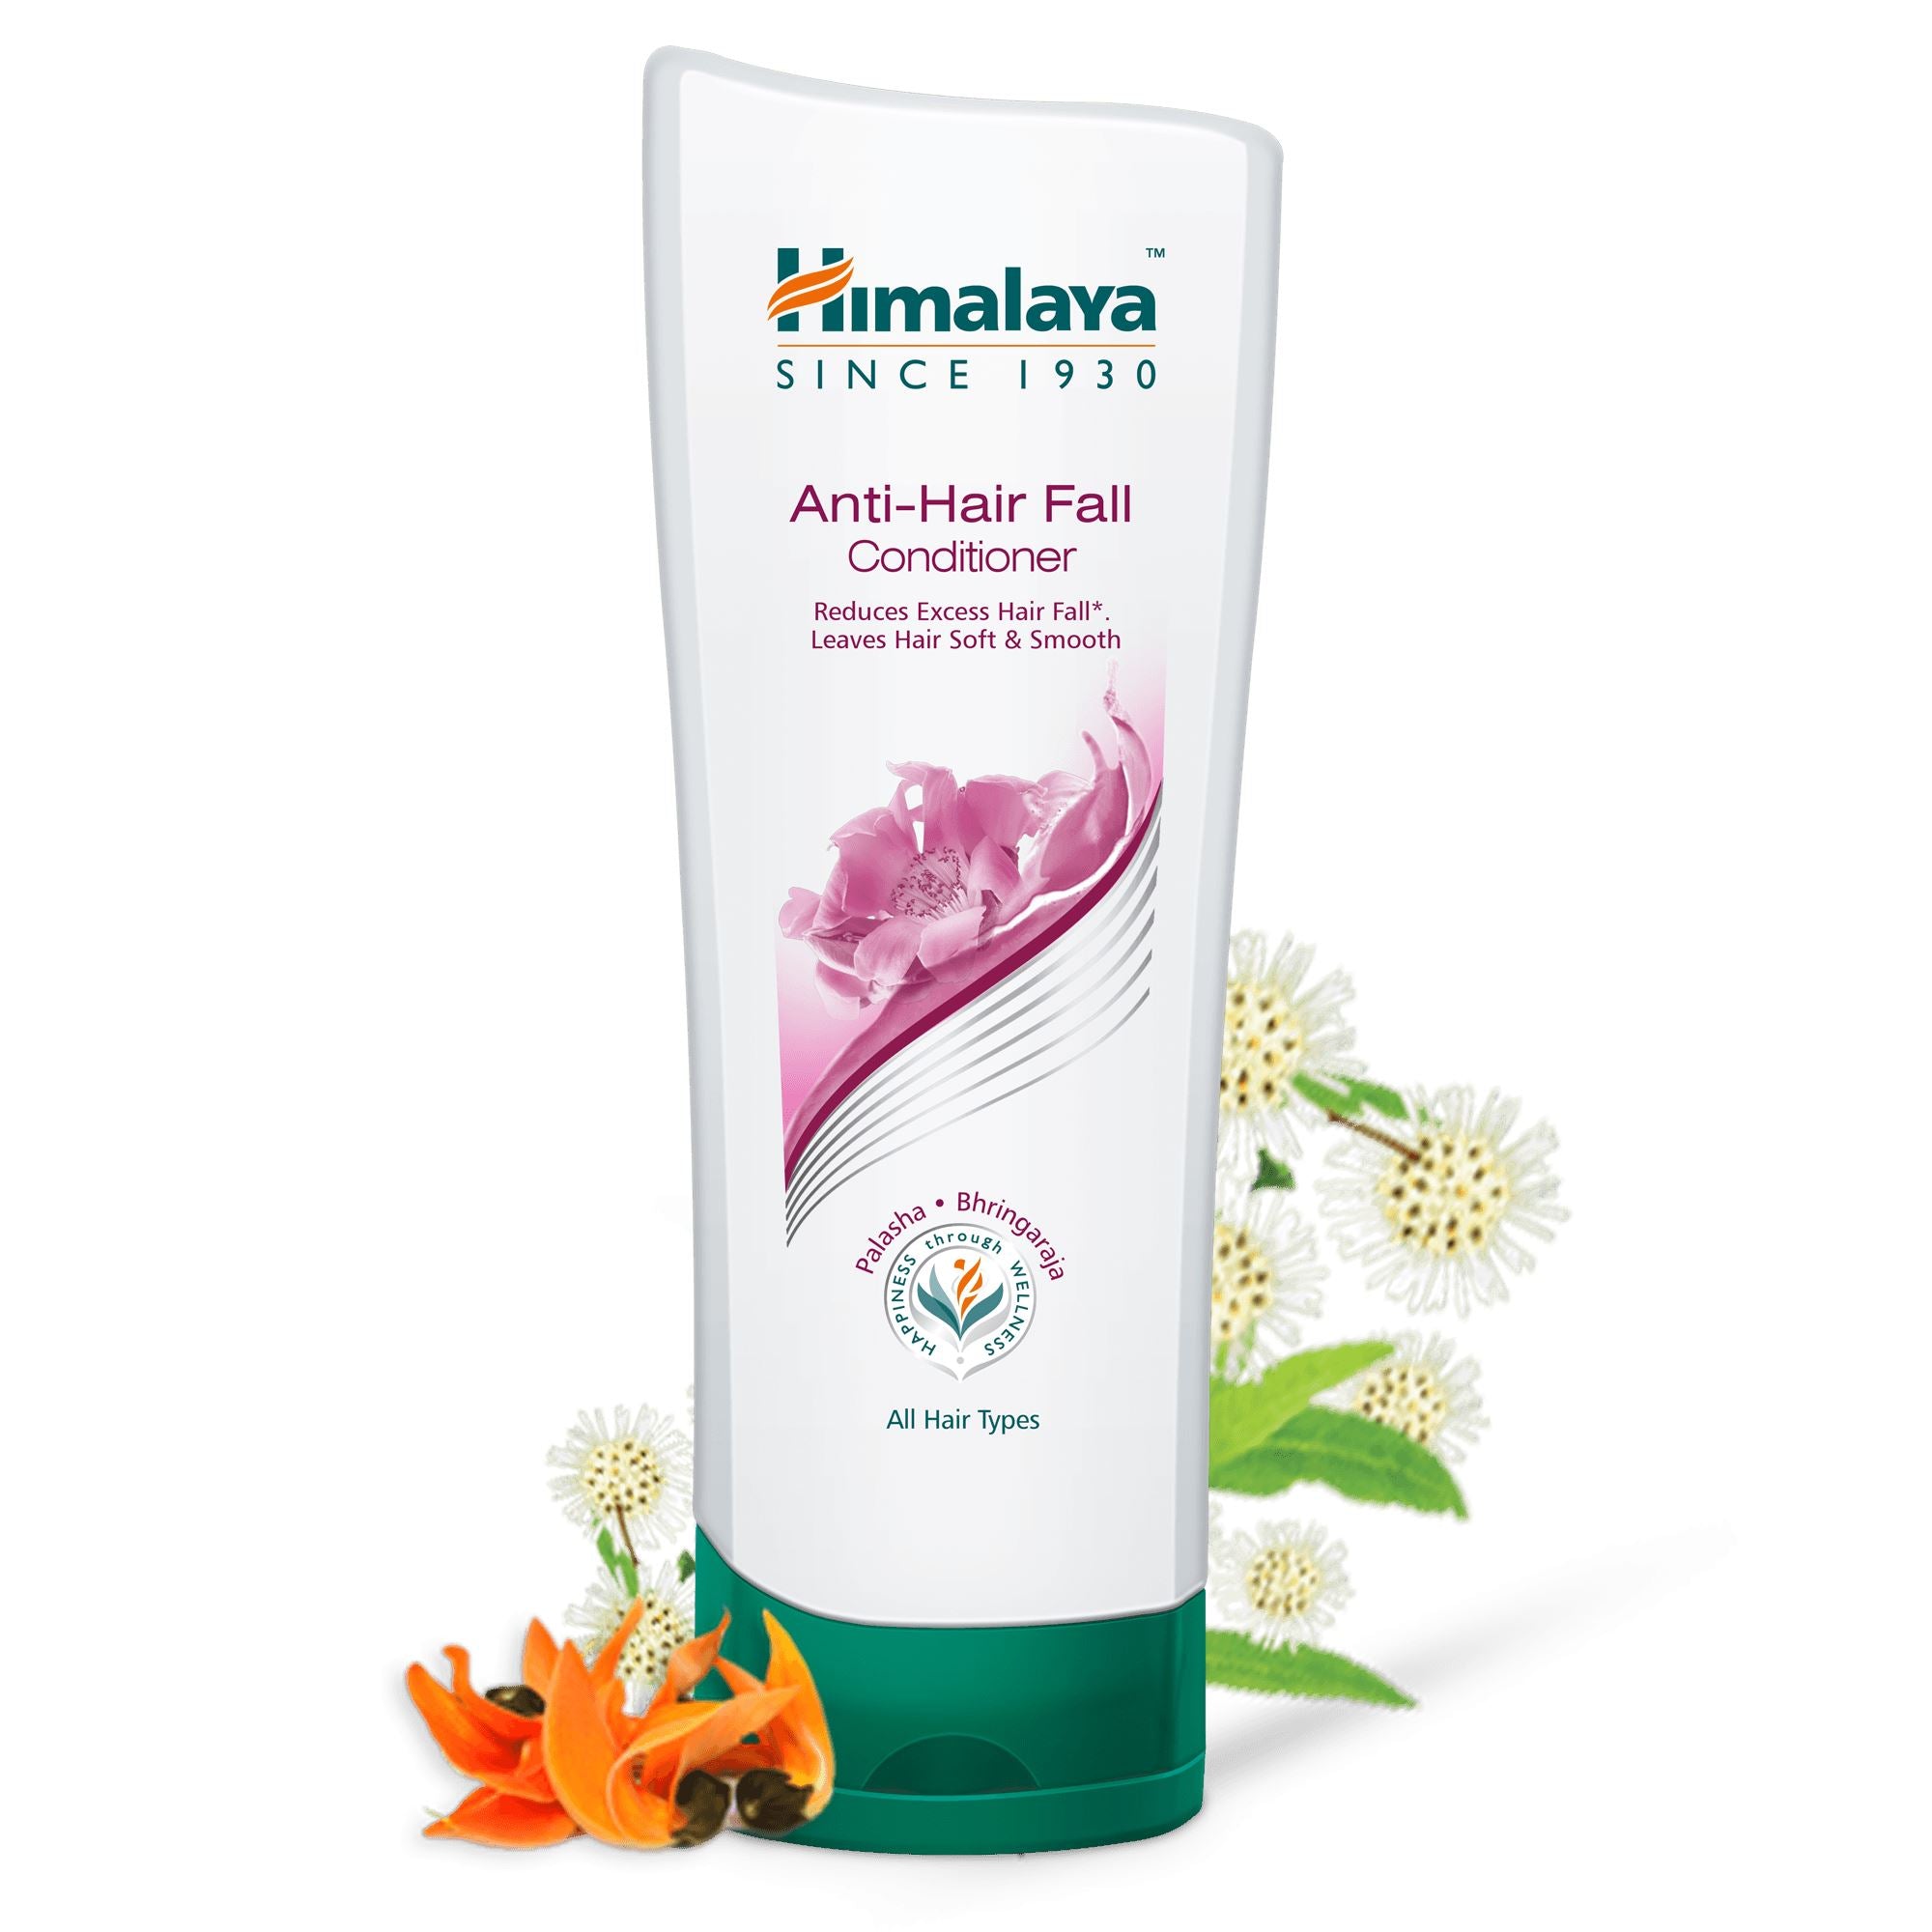 Himalaya Anti-Hair Fall Conditioner - Reduces Excess Hair Fall